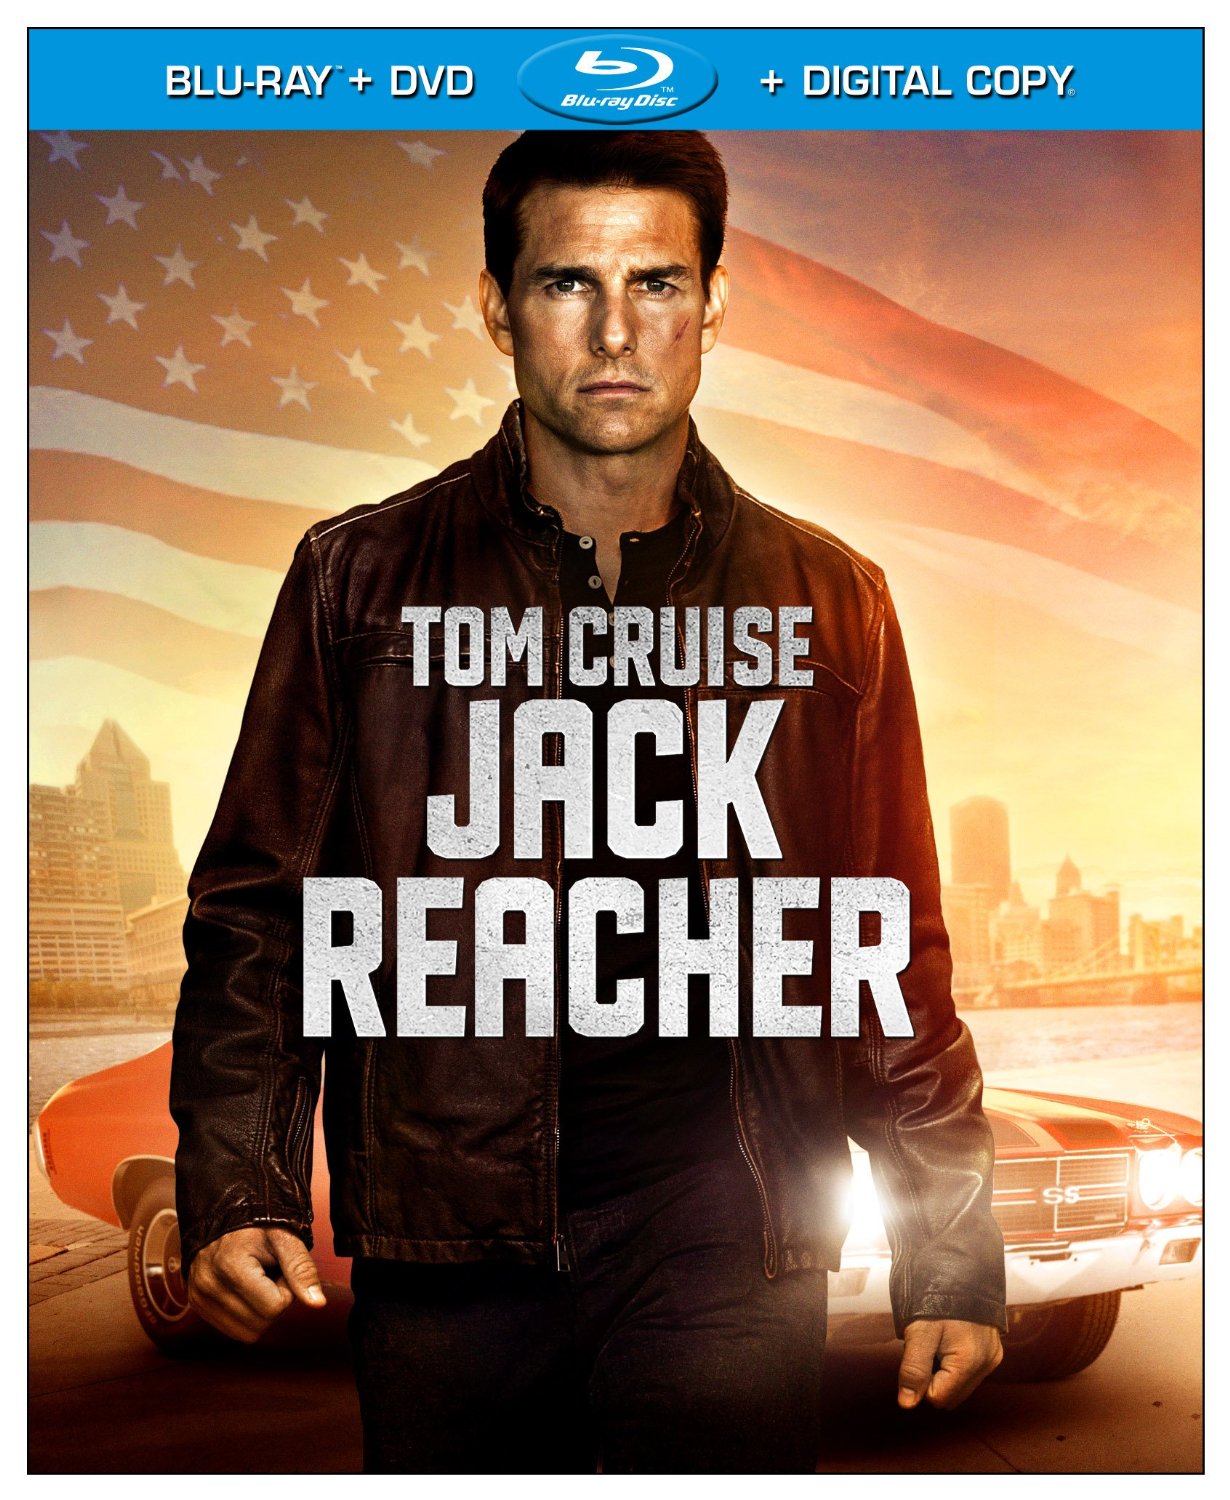 Jack Reacher was released on Blu-ray and DVD on May 7, 2013